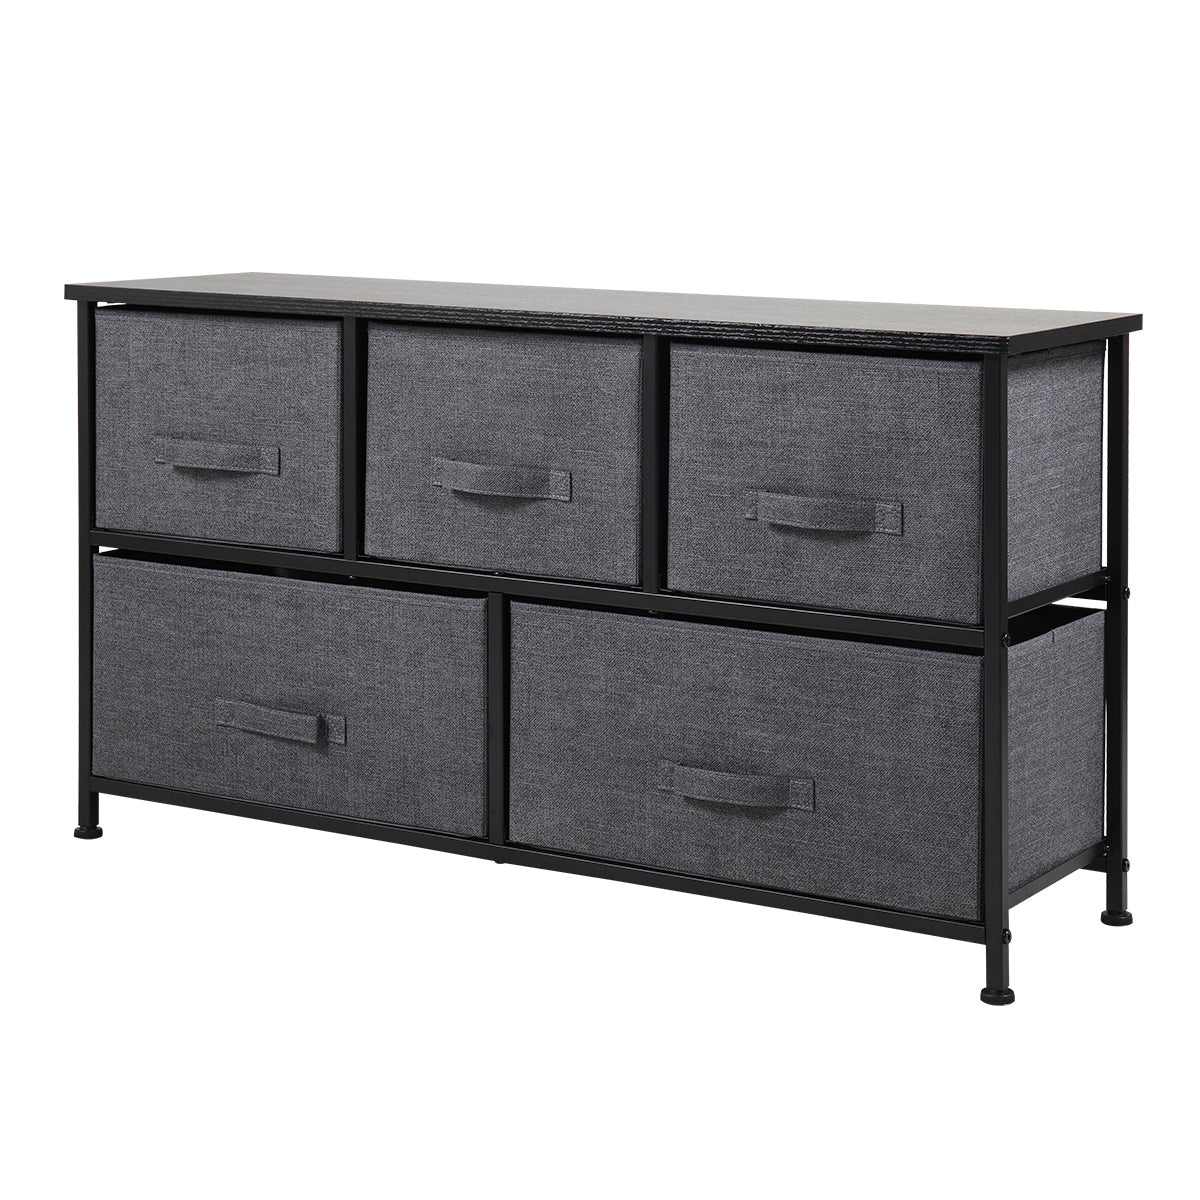 5 Fabric Drawers with a Metal Frame (Black)